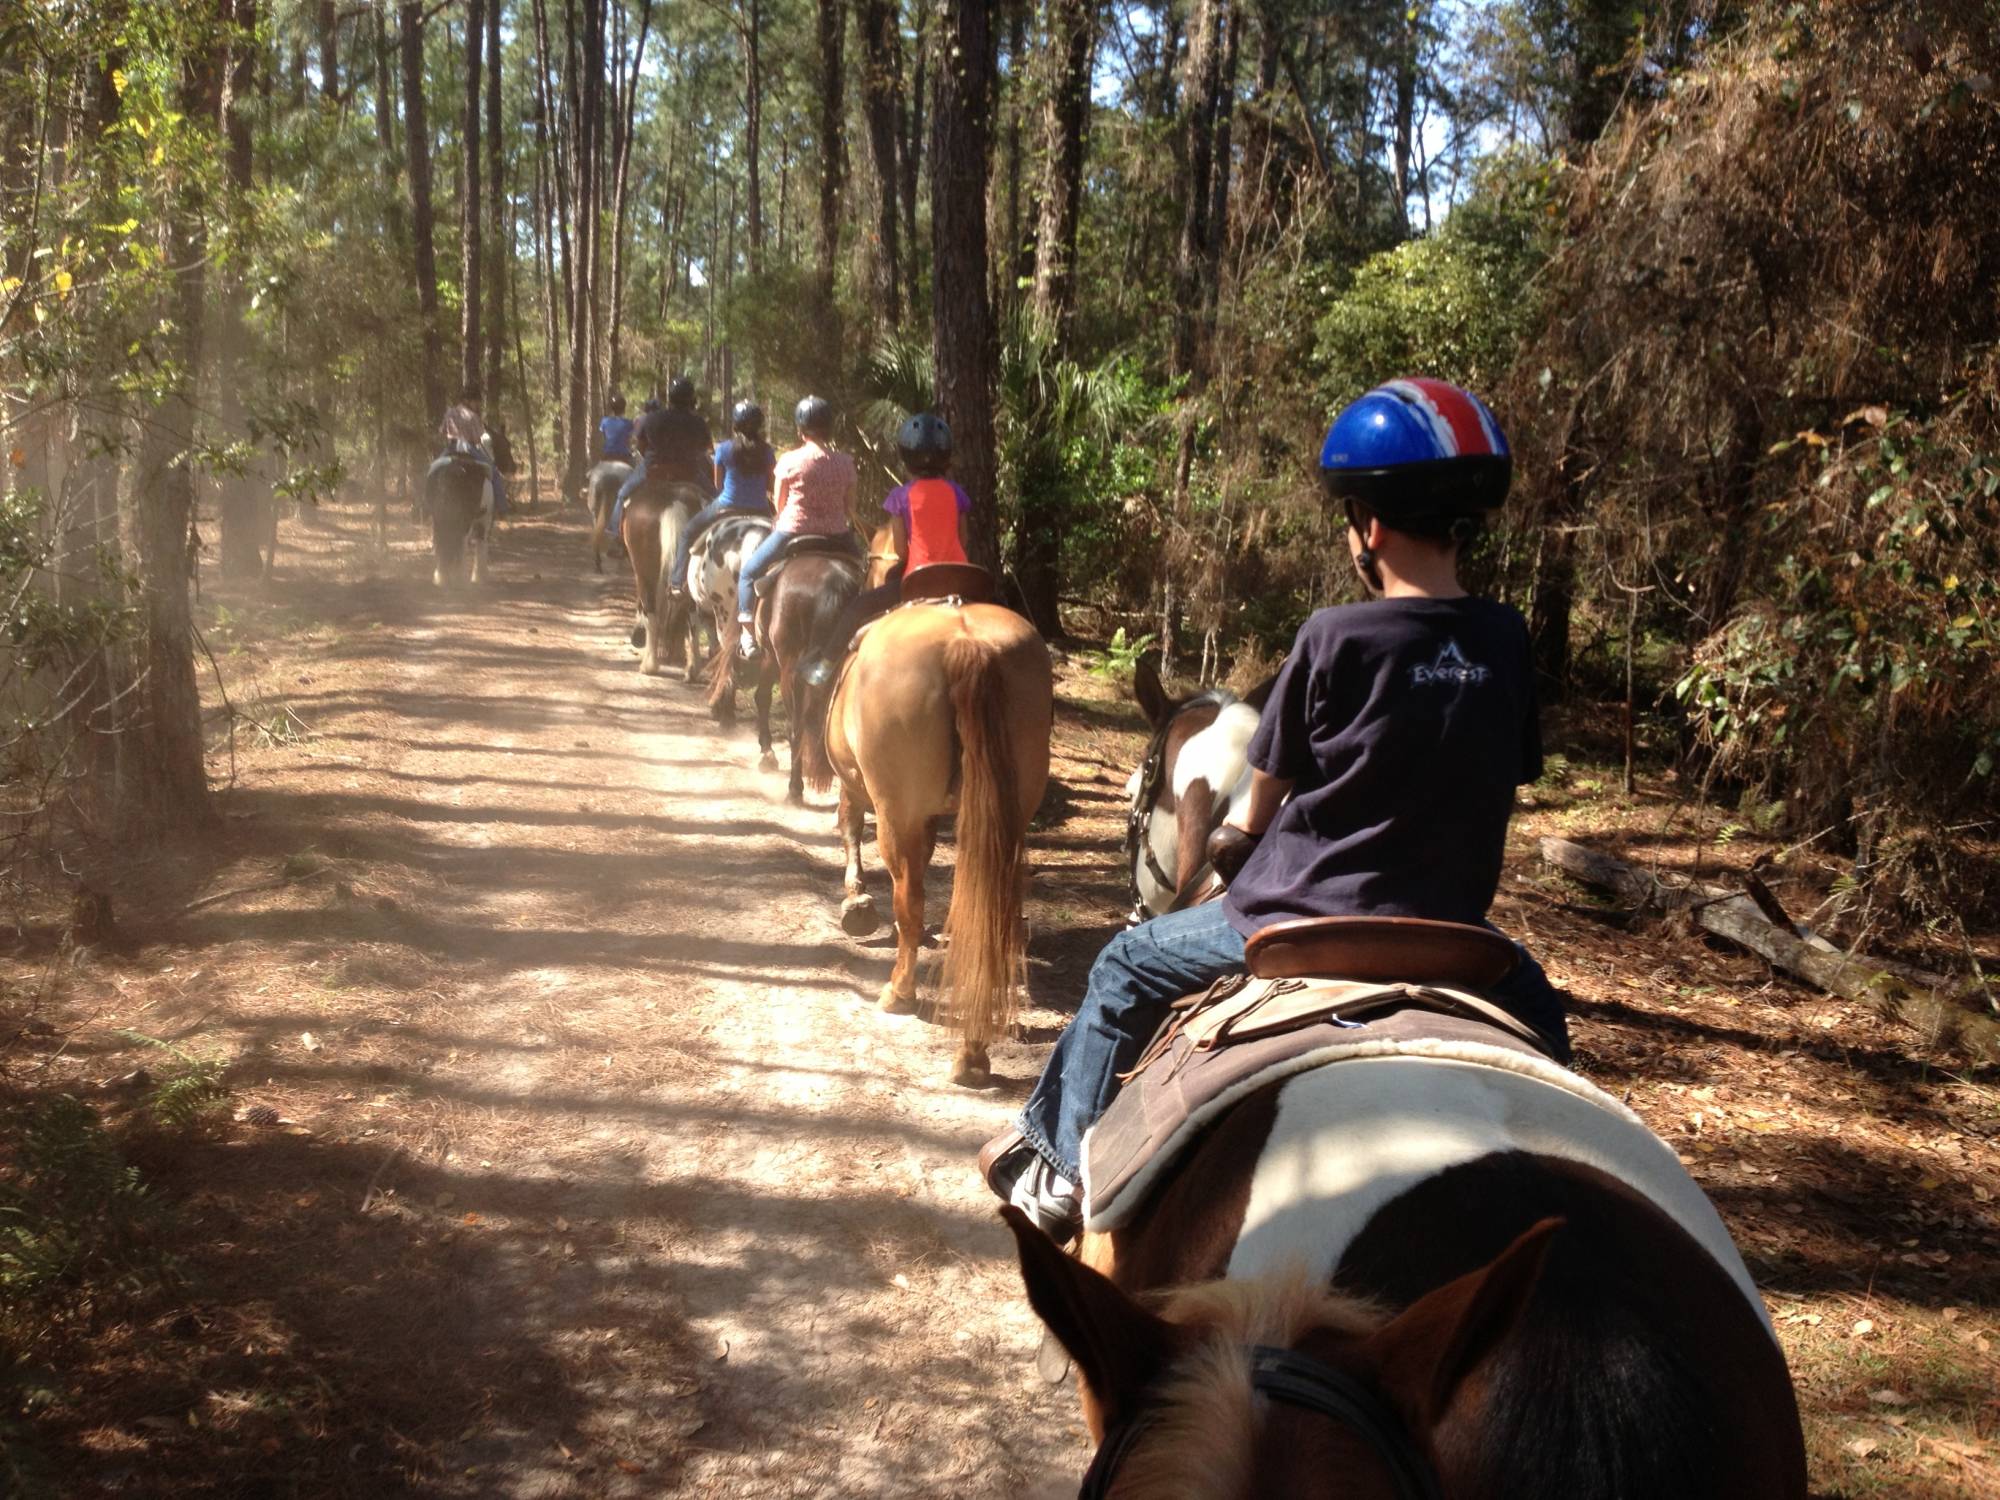 Explore Fort Wilderness from Horse-back with a Trail Ride |PassPorter.com